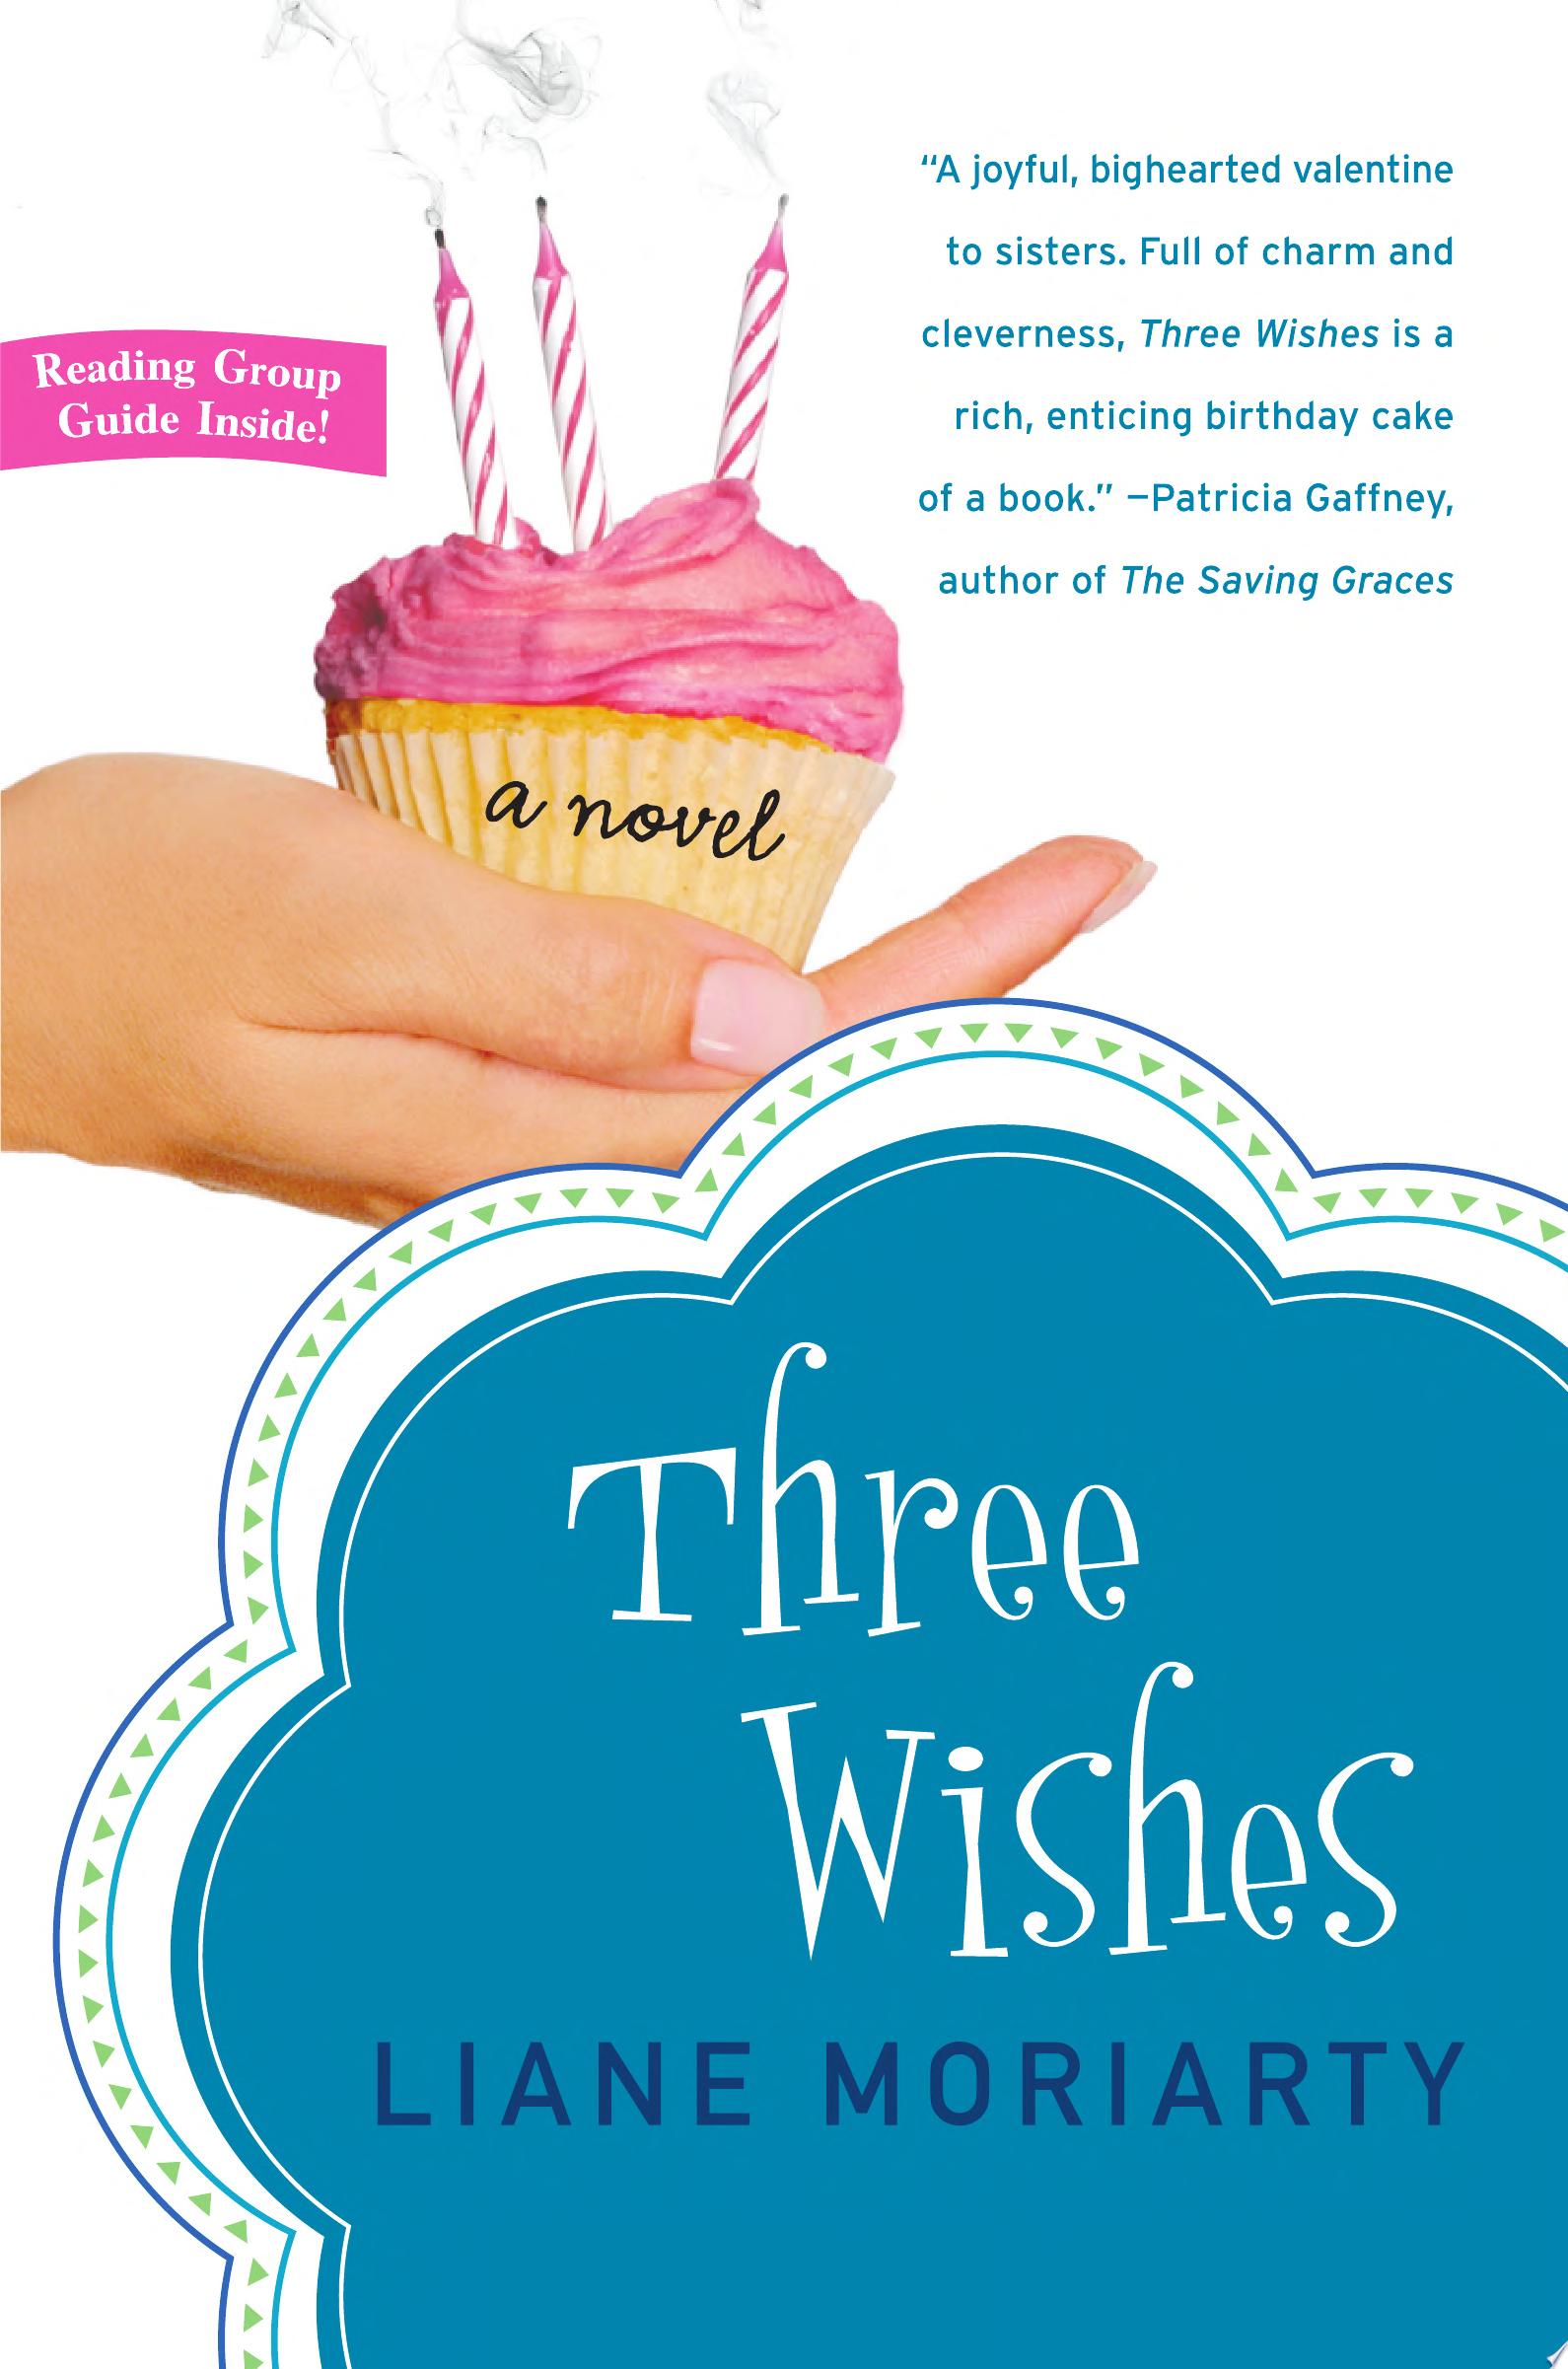 Image for "Three Wishes"